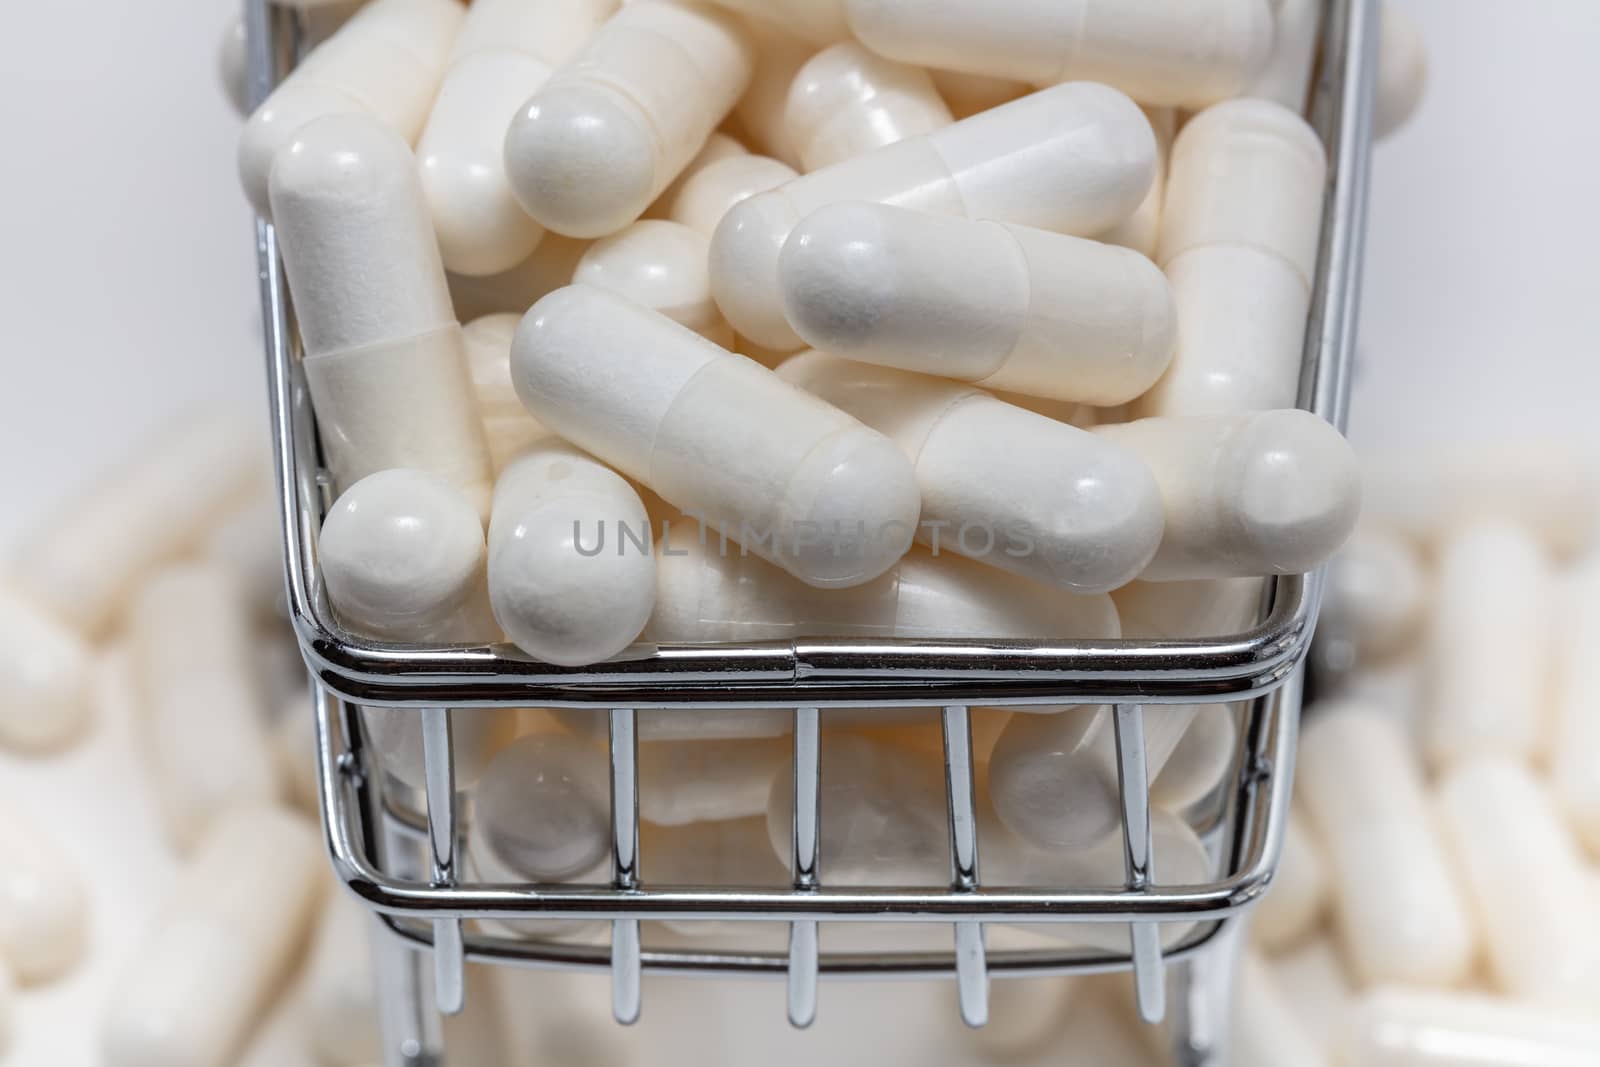 High angle shot of a small shopping cart full of white pills. White background. Close up shot. Some pills under the cart blurry in the background. Shopping online, pharmaceutical business concepts.